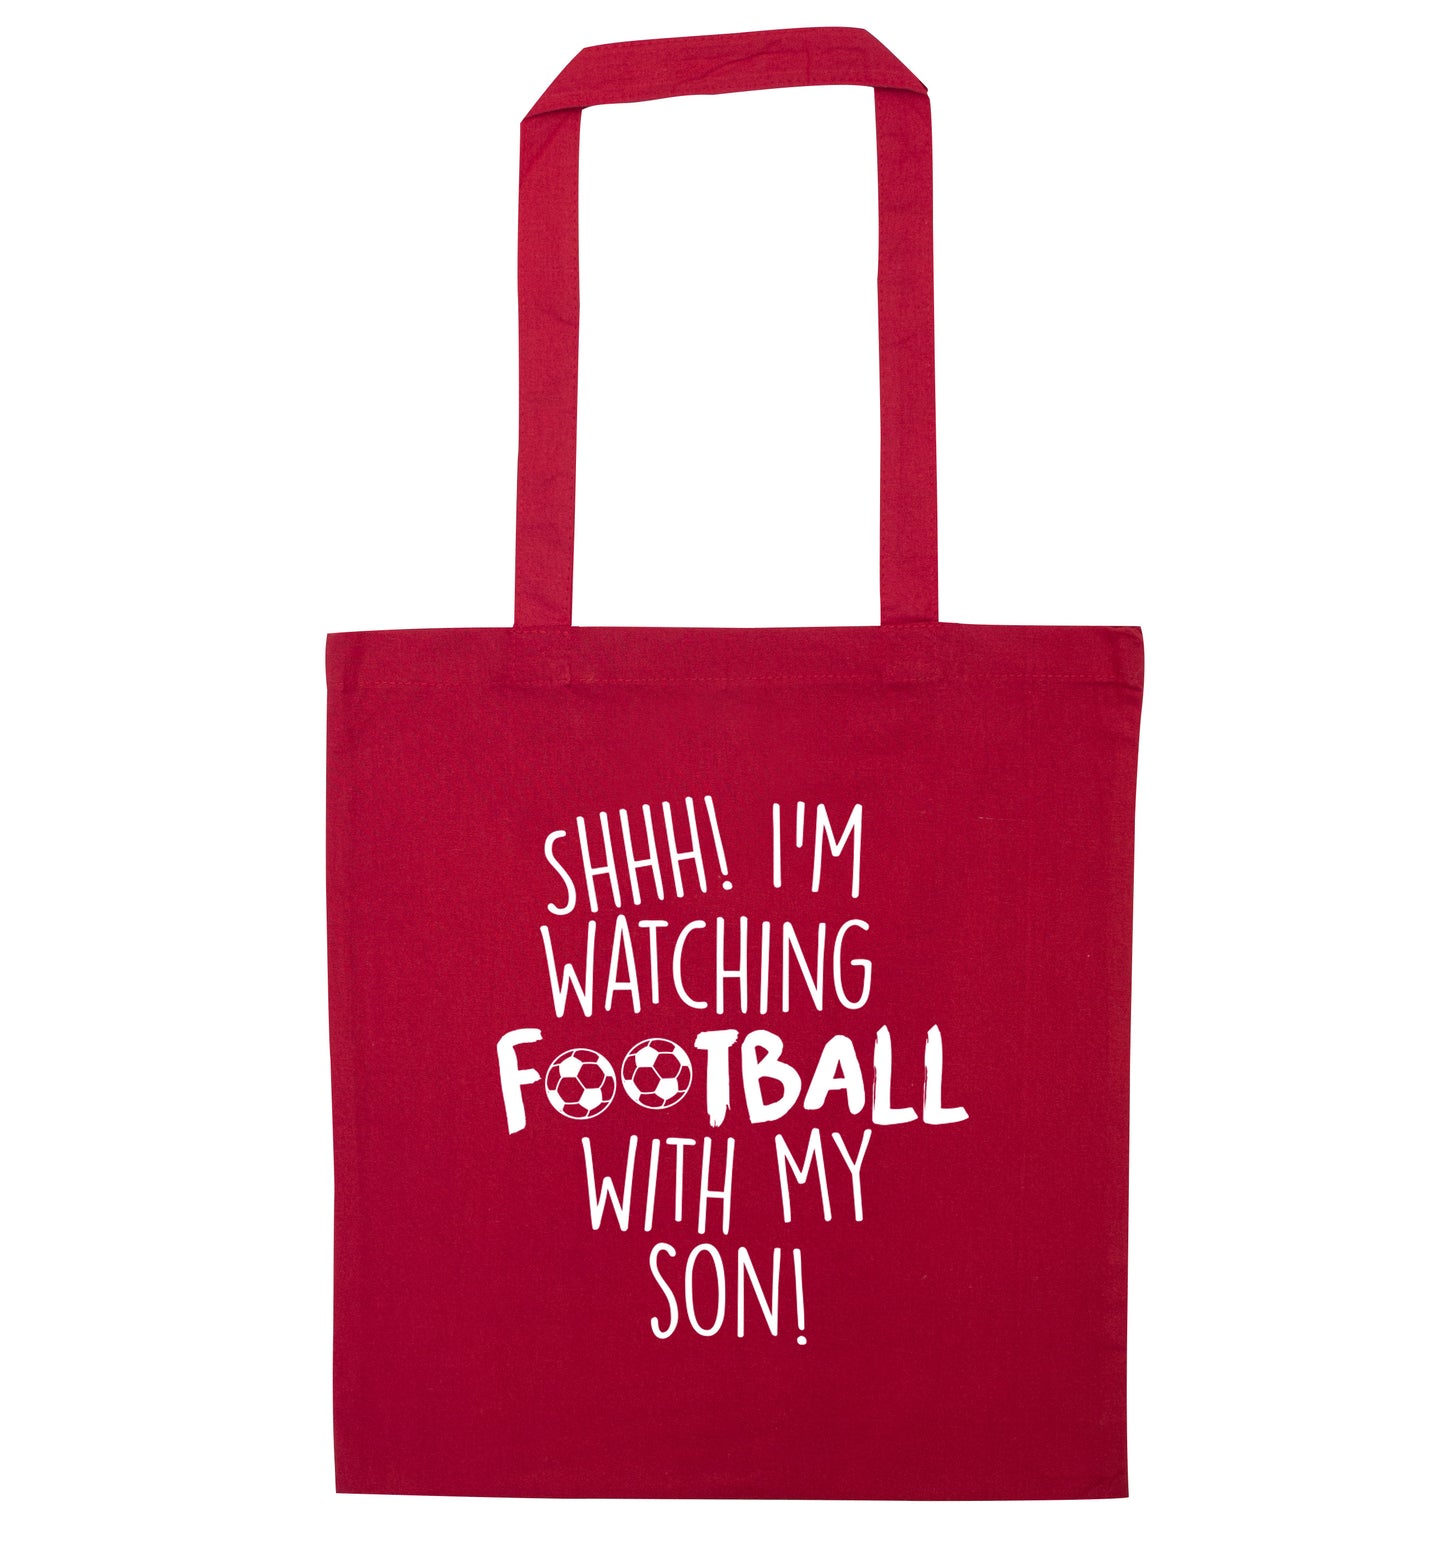 Shhh I'm watching football with my son red tote bag